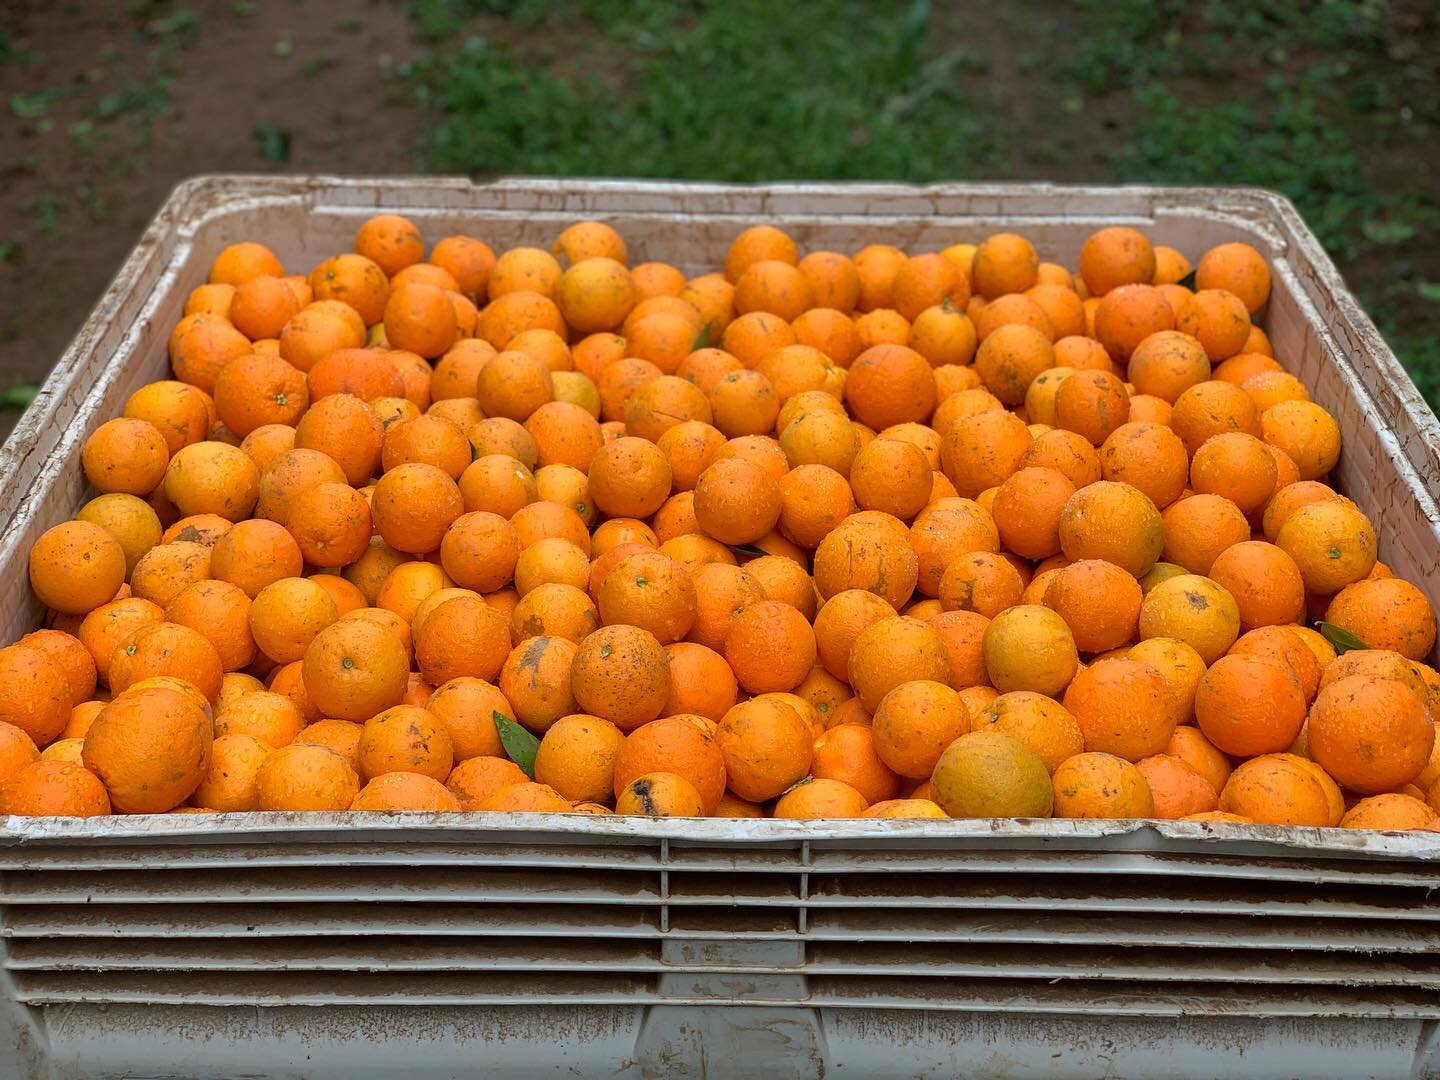 The CFM team are continuously broadening our operations, with some particular farms producing citrus

The perfect lunchbox snack!

#cfm #ruralinvestment #agriculture #ausag #customisedfarmmanagement